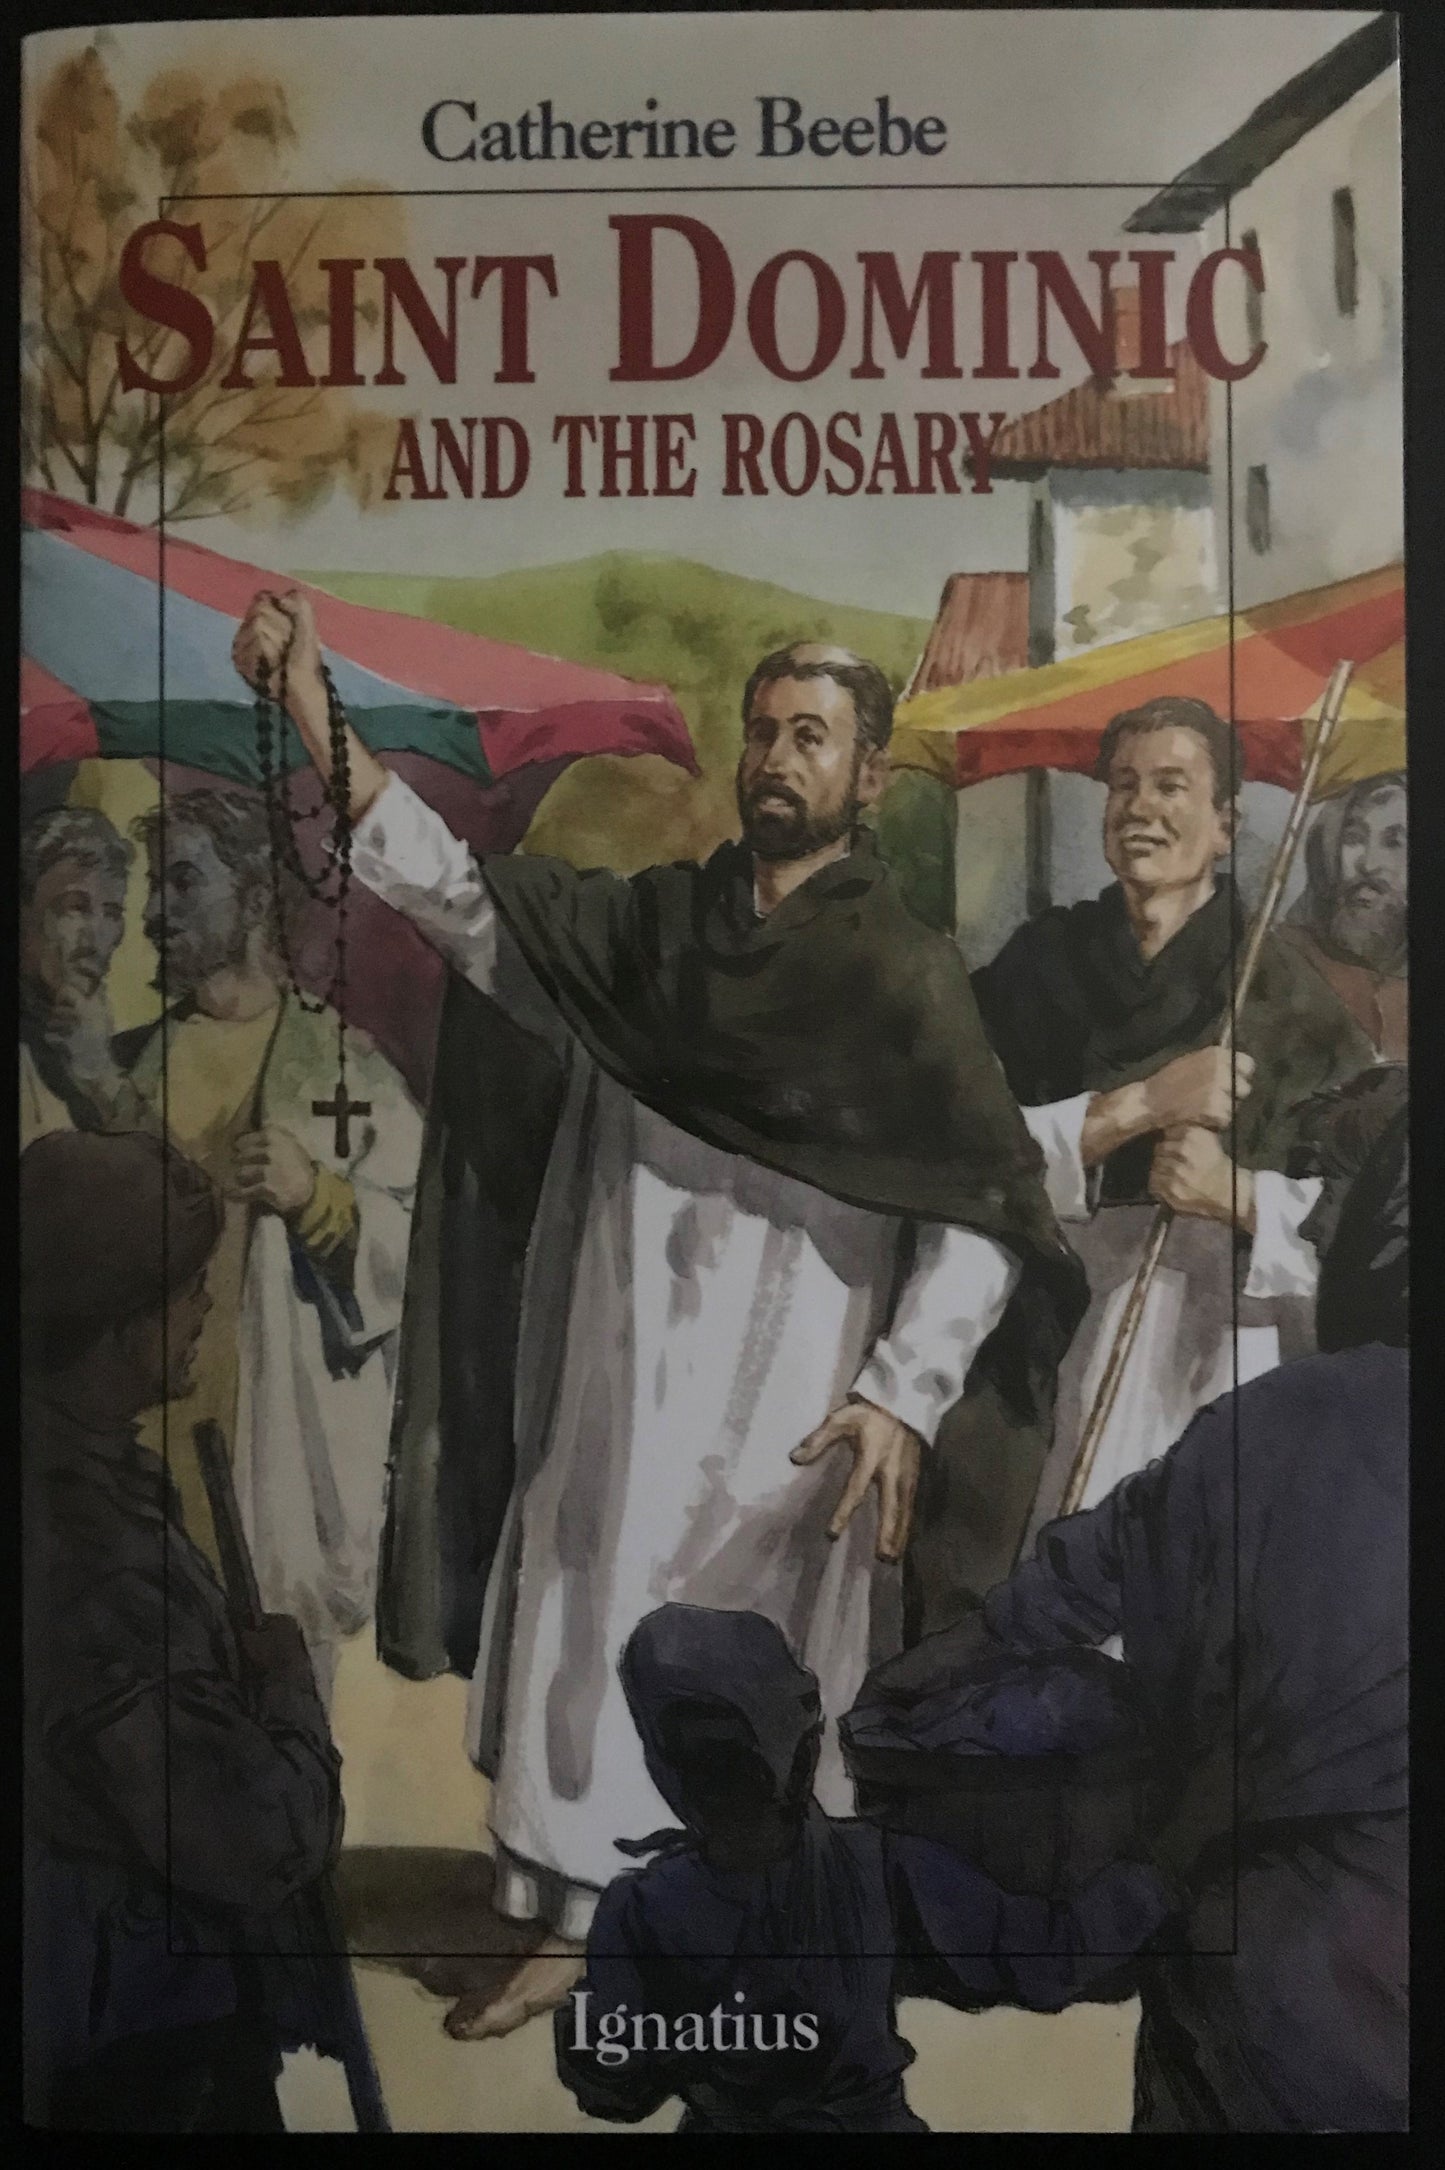 Book: Saint Dominic and the Rosary